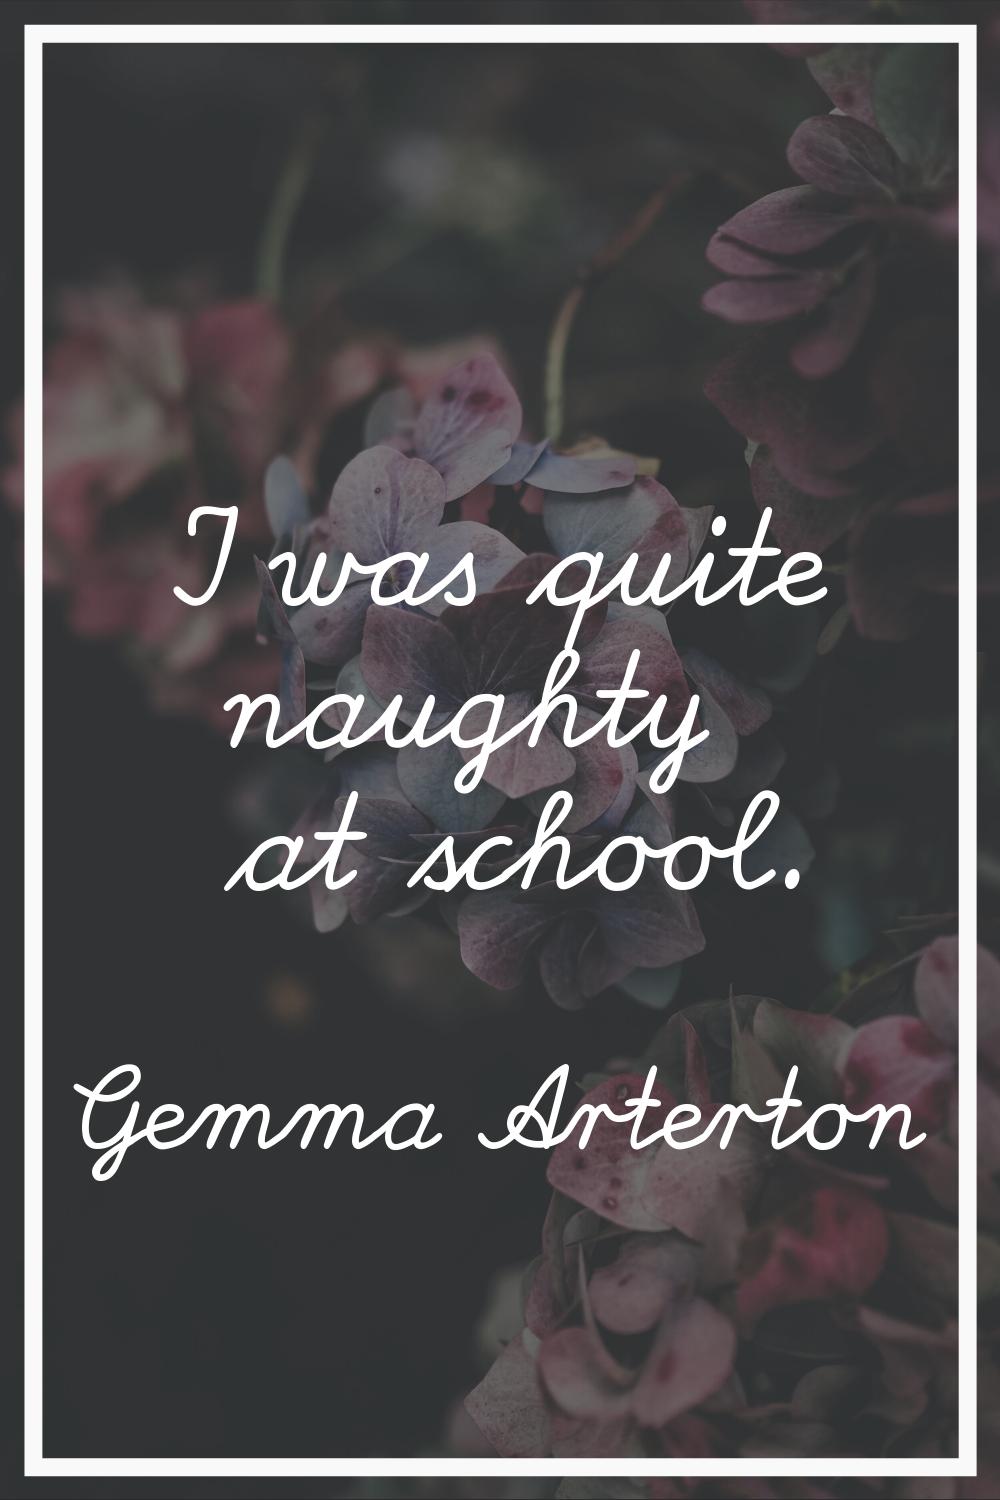 I was quite naughty at school.